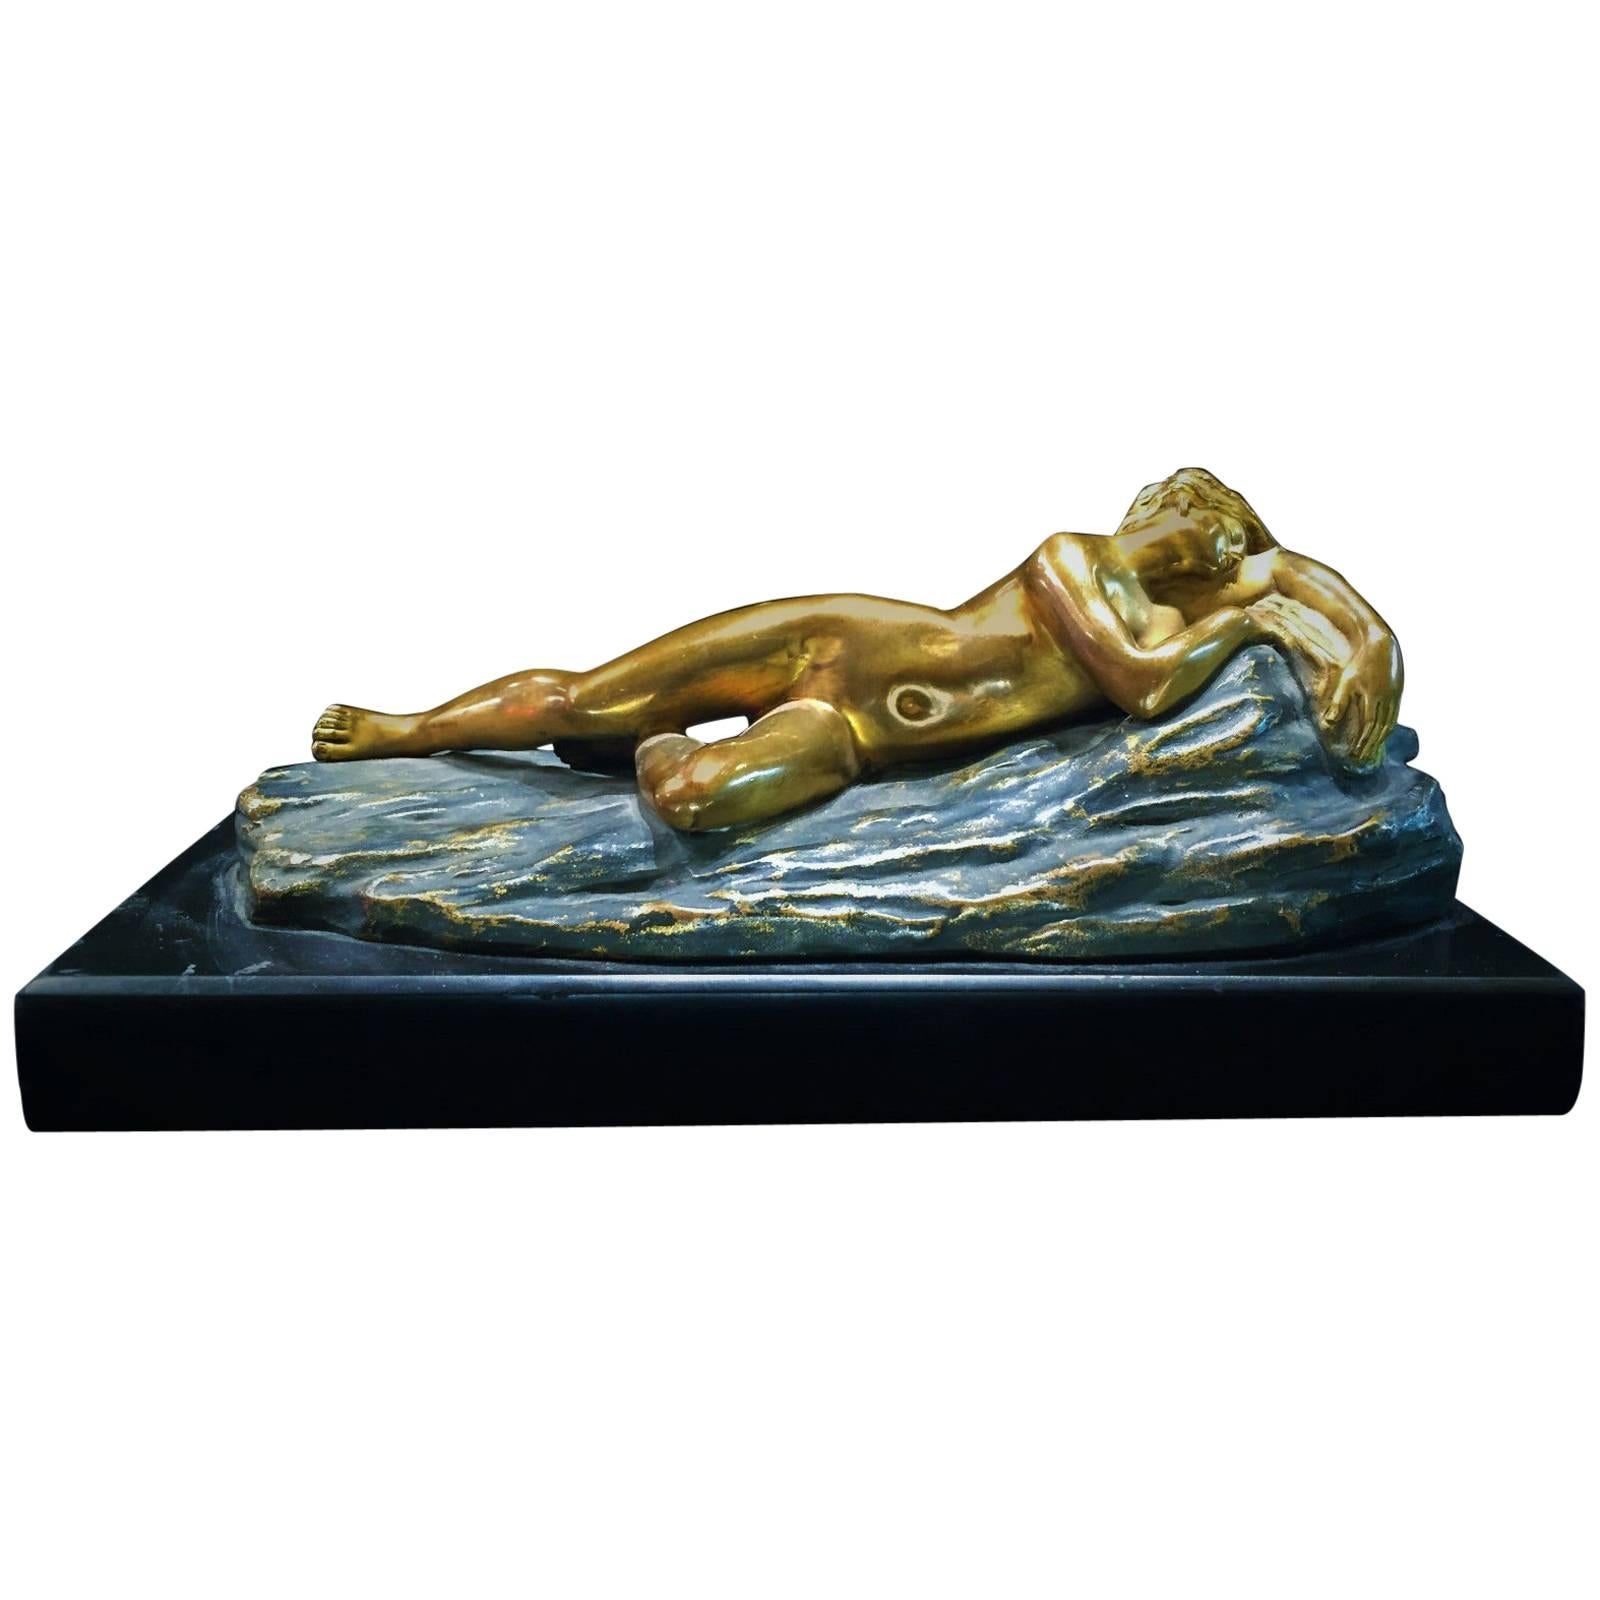 Opus-Cellini, Art Deco Bronze and Marble Sculptural Paperweight, ca. 1930 For Sale